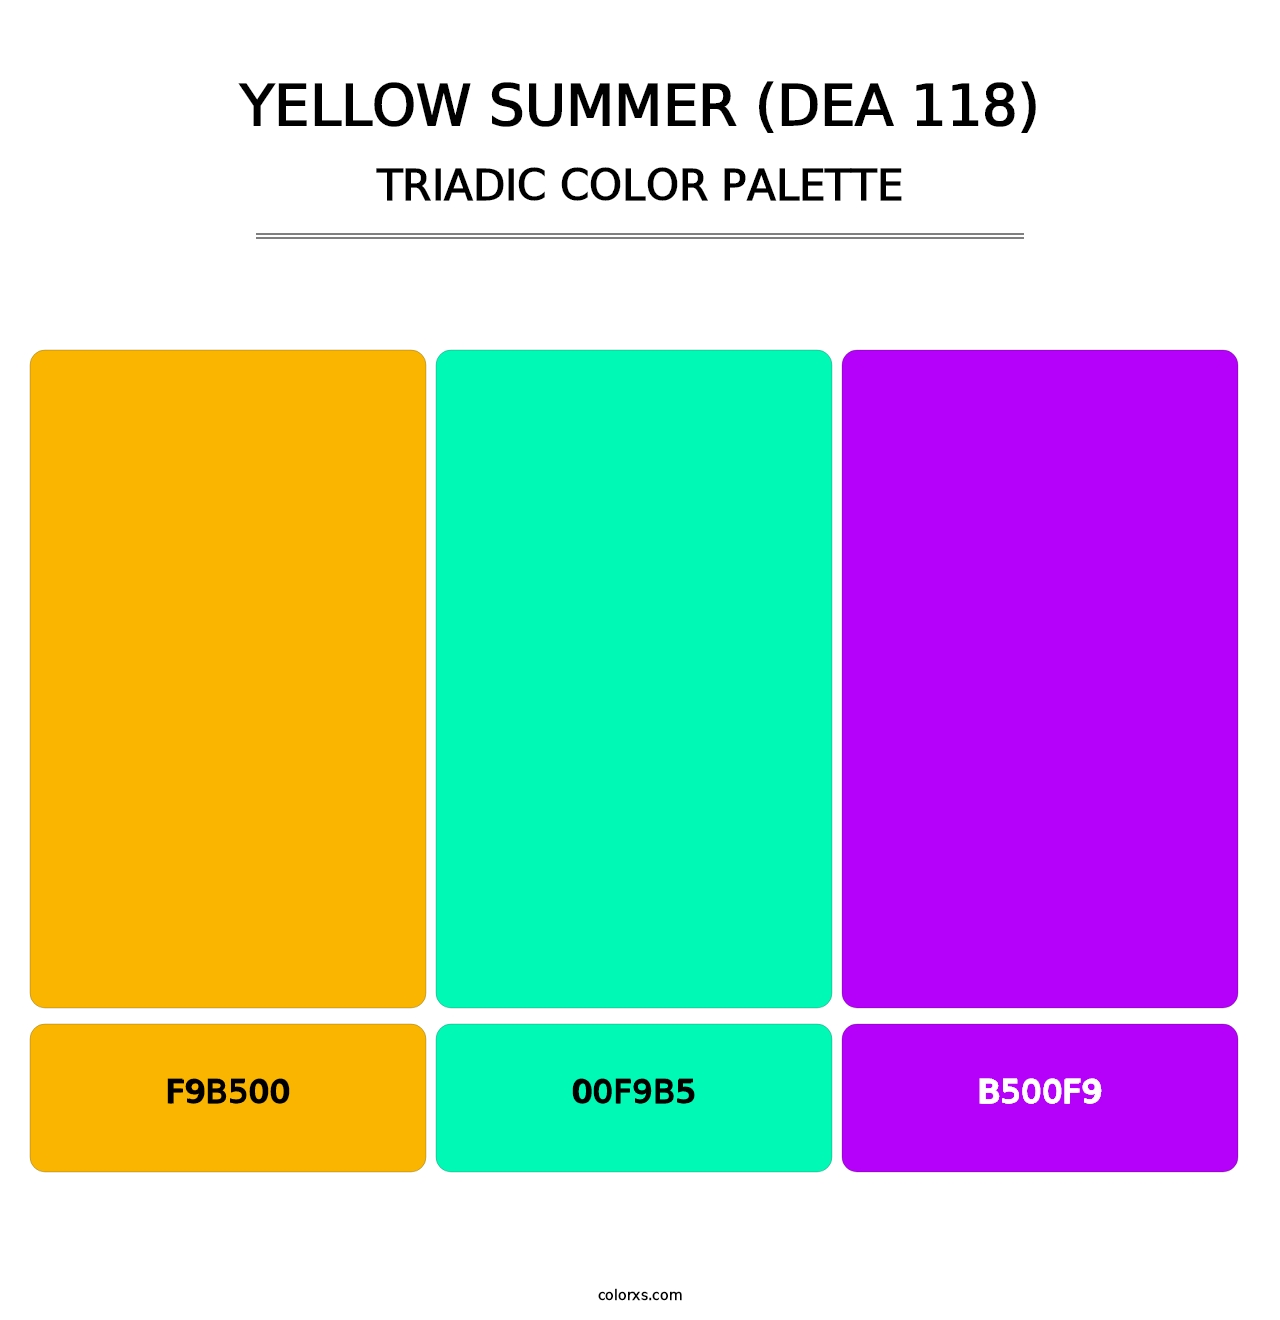 Yellow Summer (DEA 118) - Triadic Color Palette